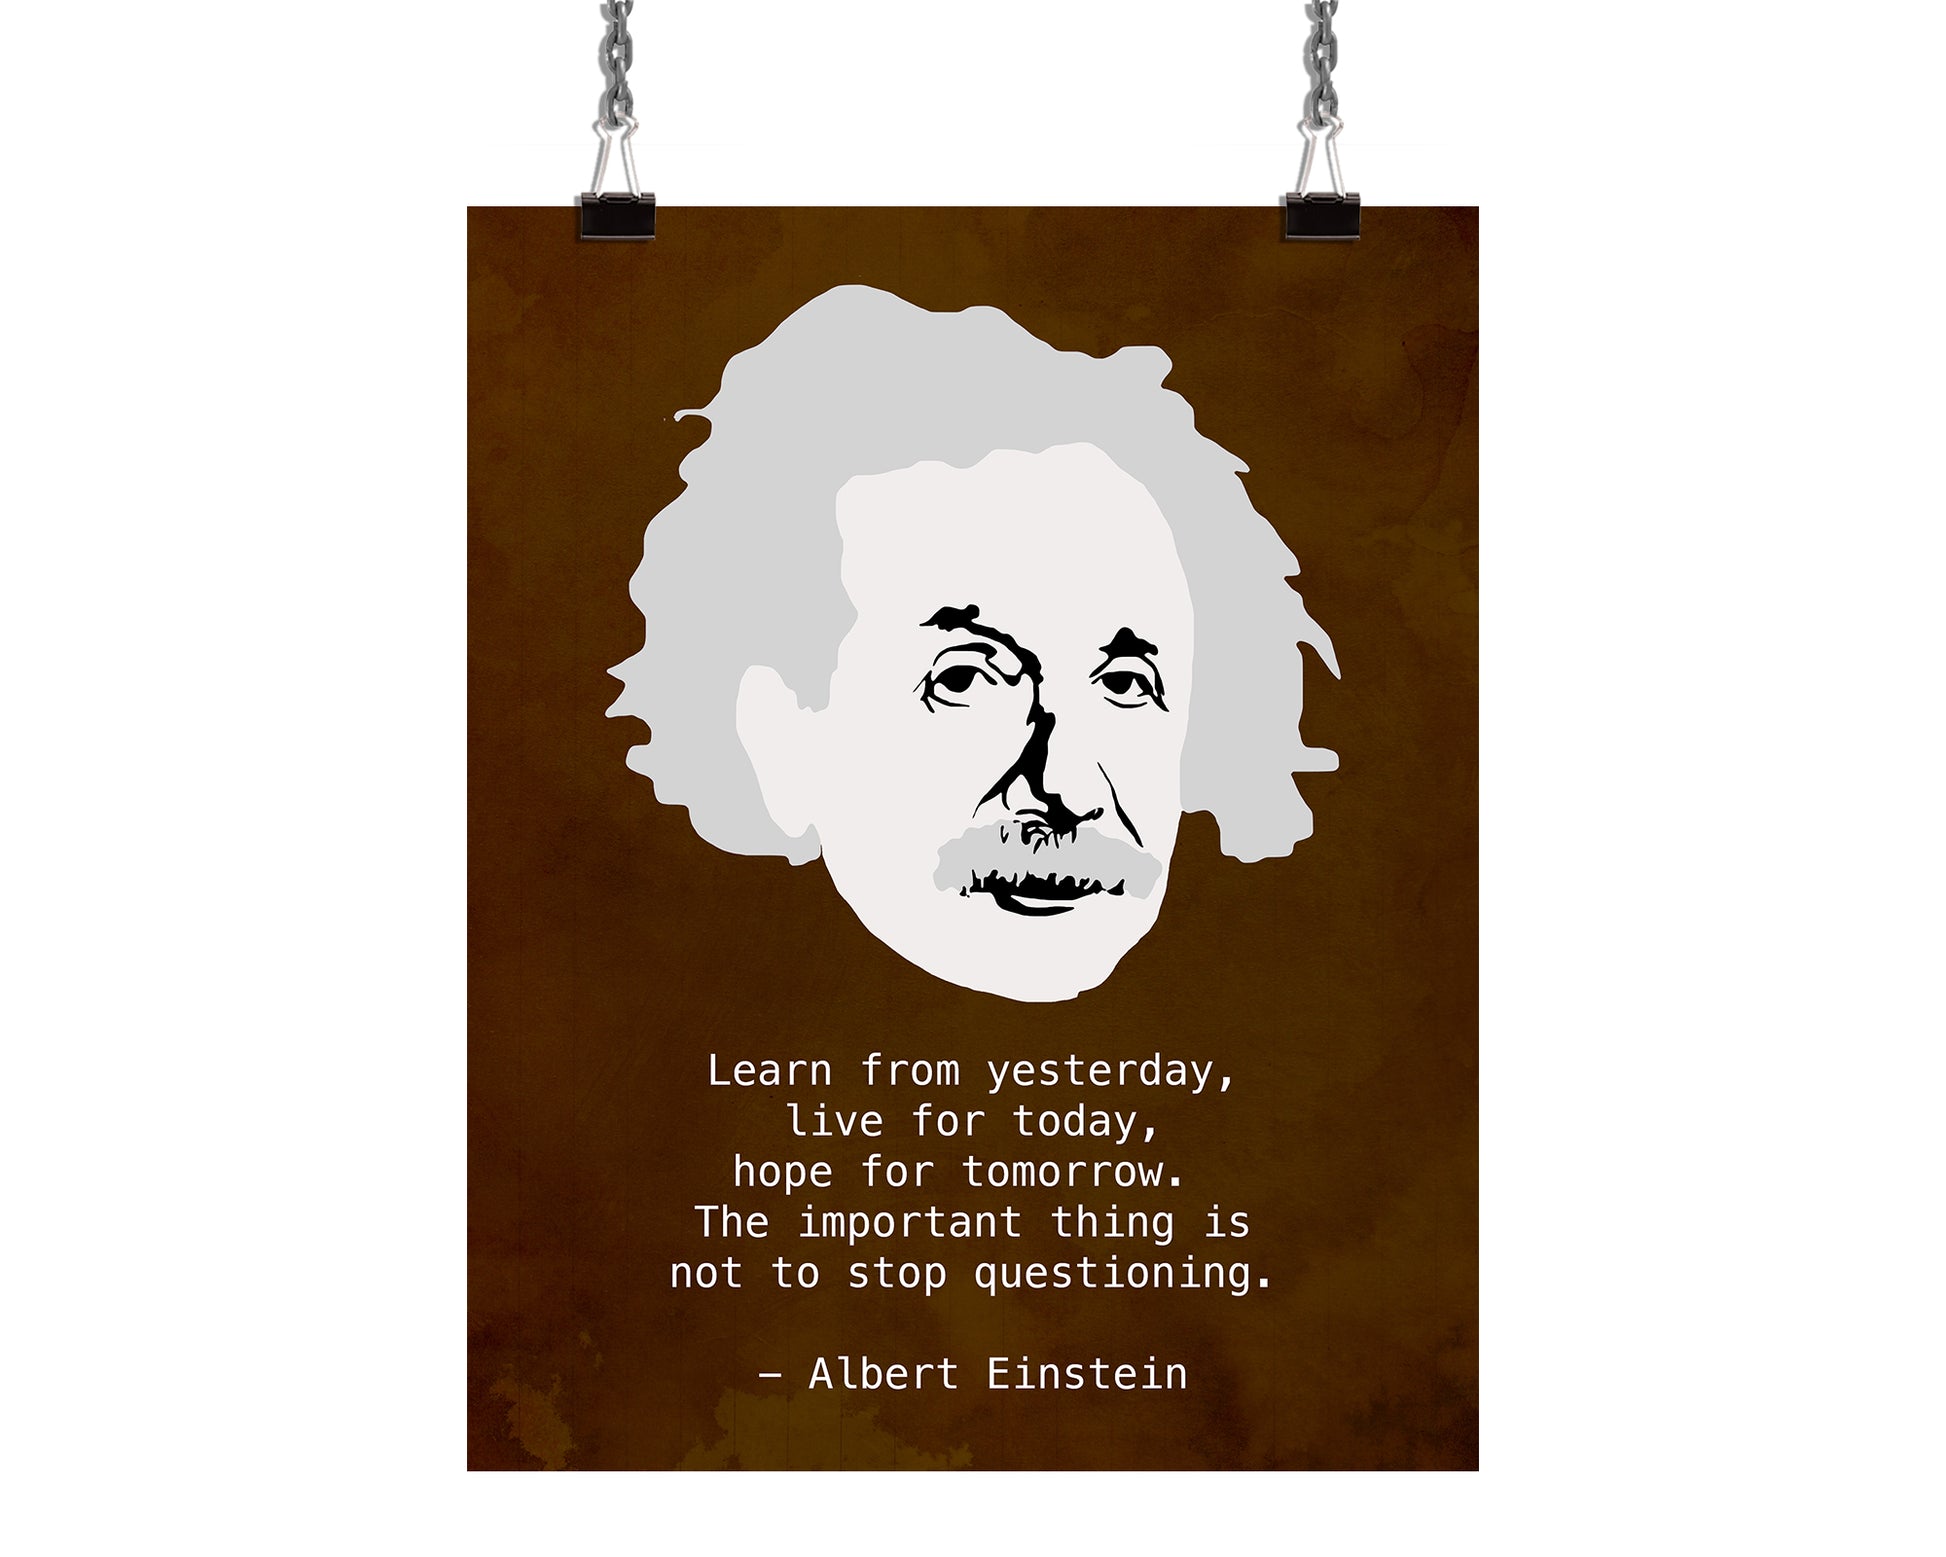 Art print with minimalist portrait of scientist Albert Einstein and his quote: "Learn from yesterday. Live for today. Hope for tomorrow."